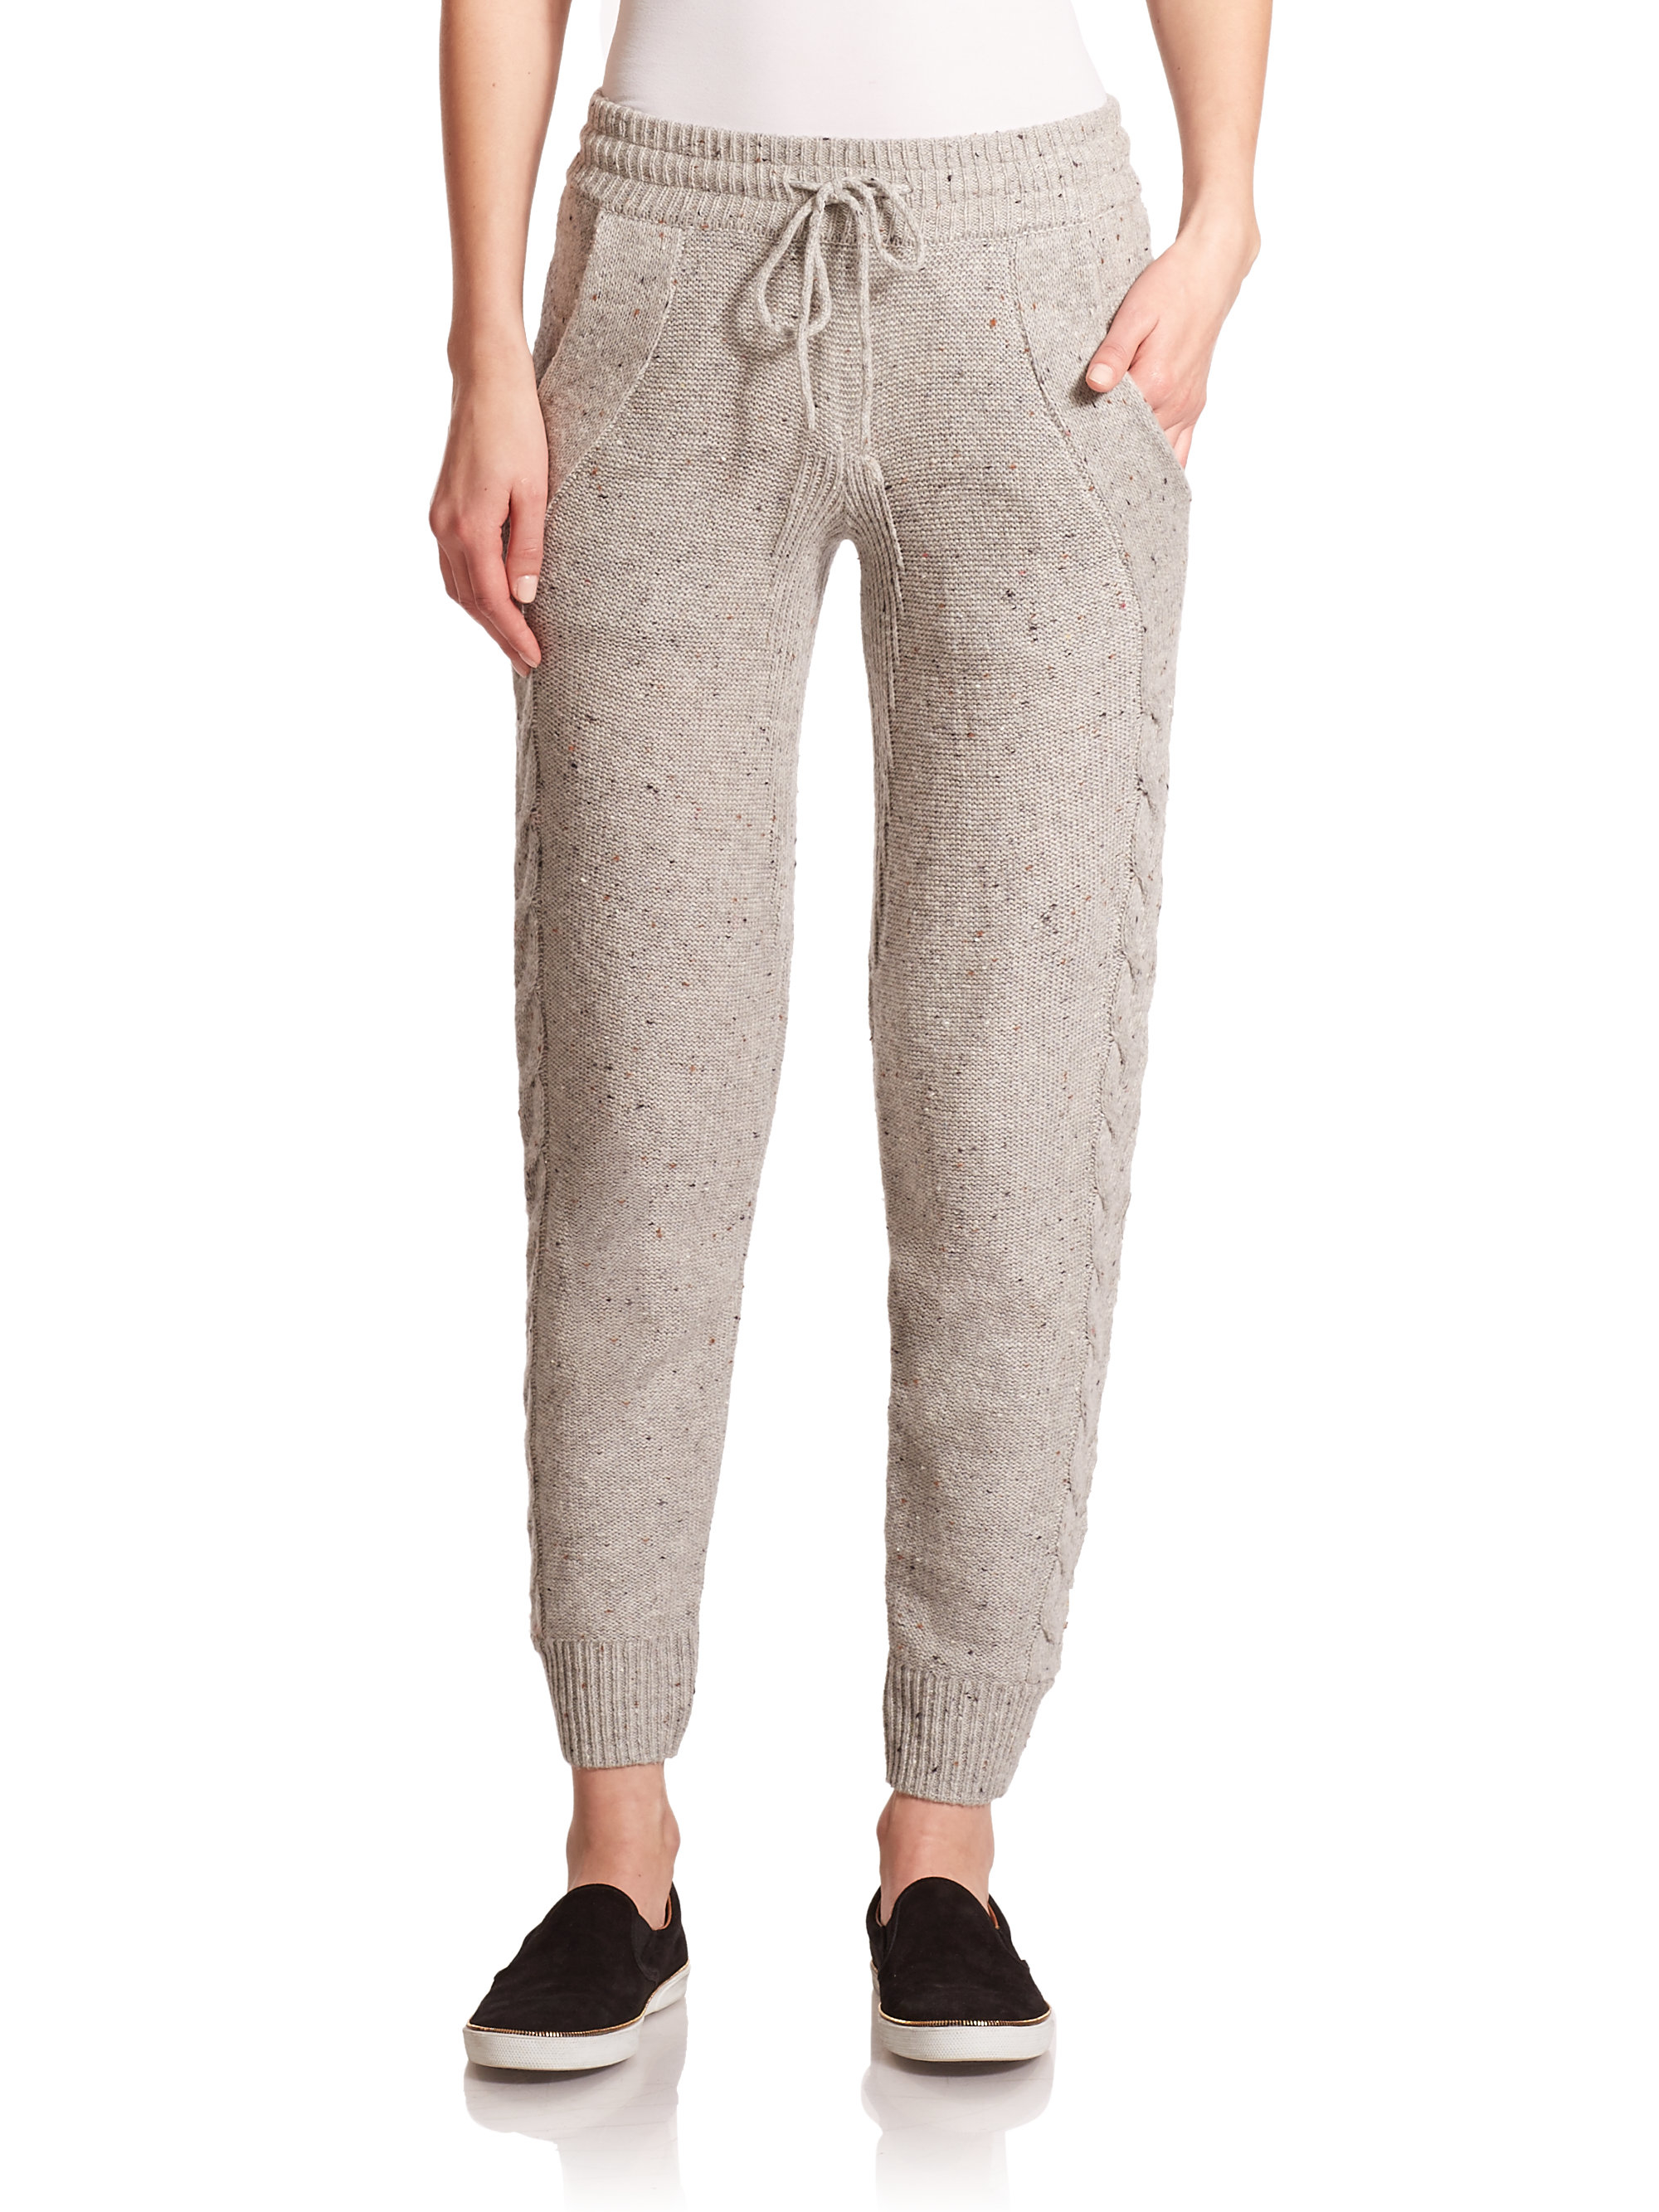 Lyst - Wildfox Corso Cable-knit Jogger Pants in Gray